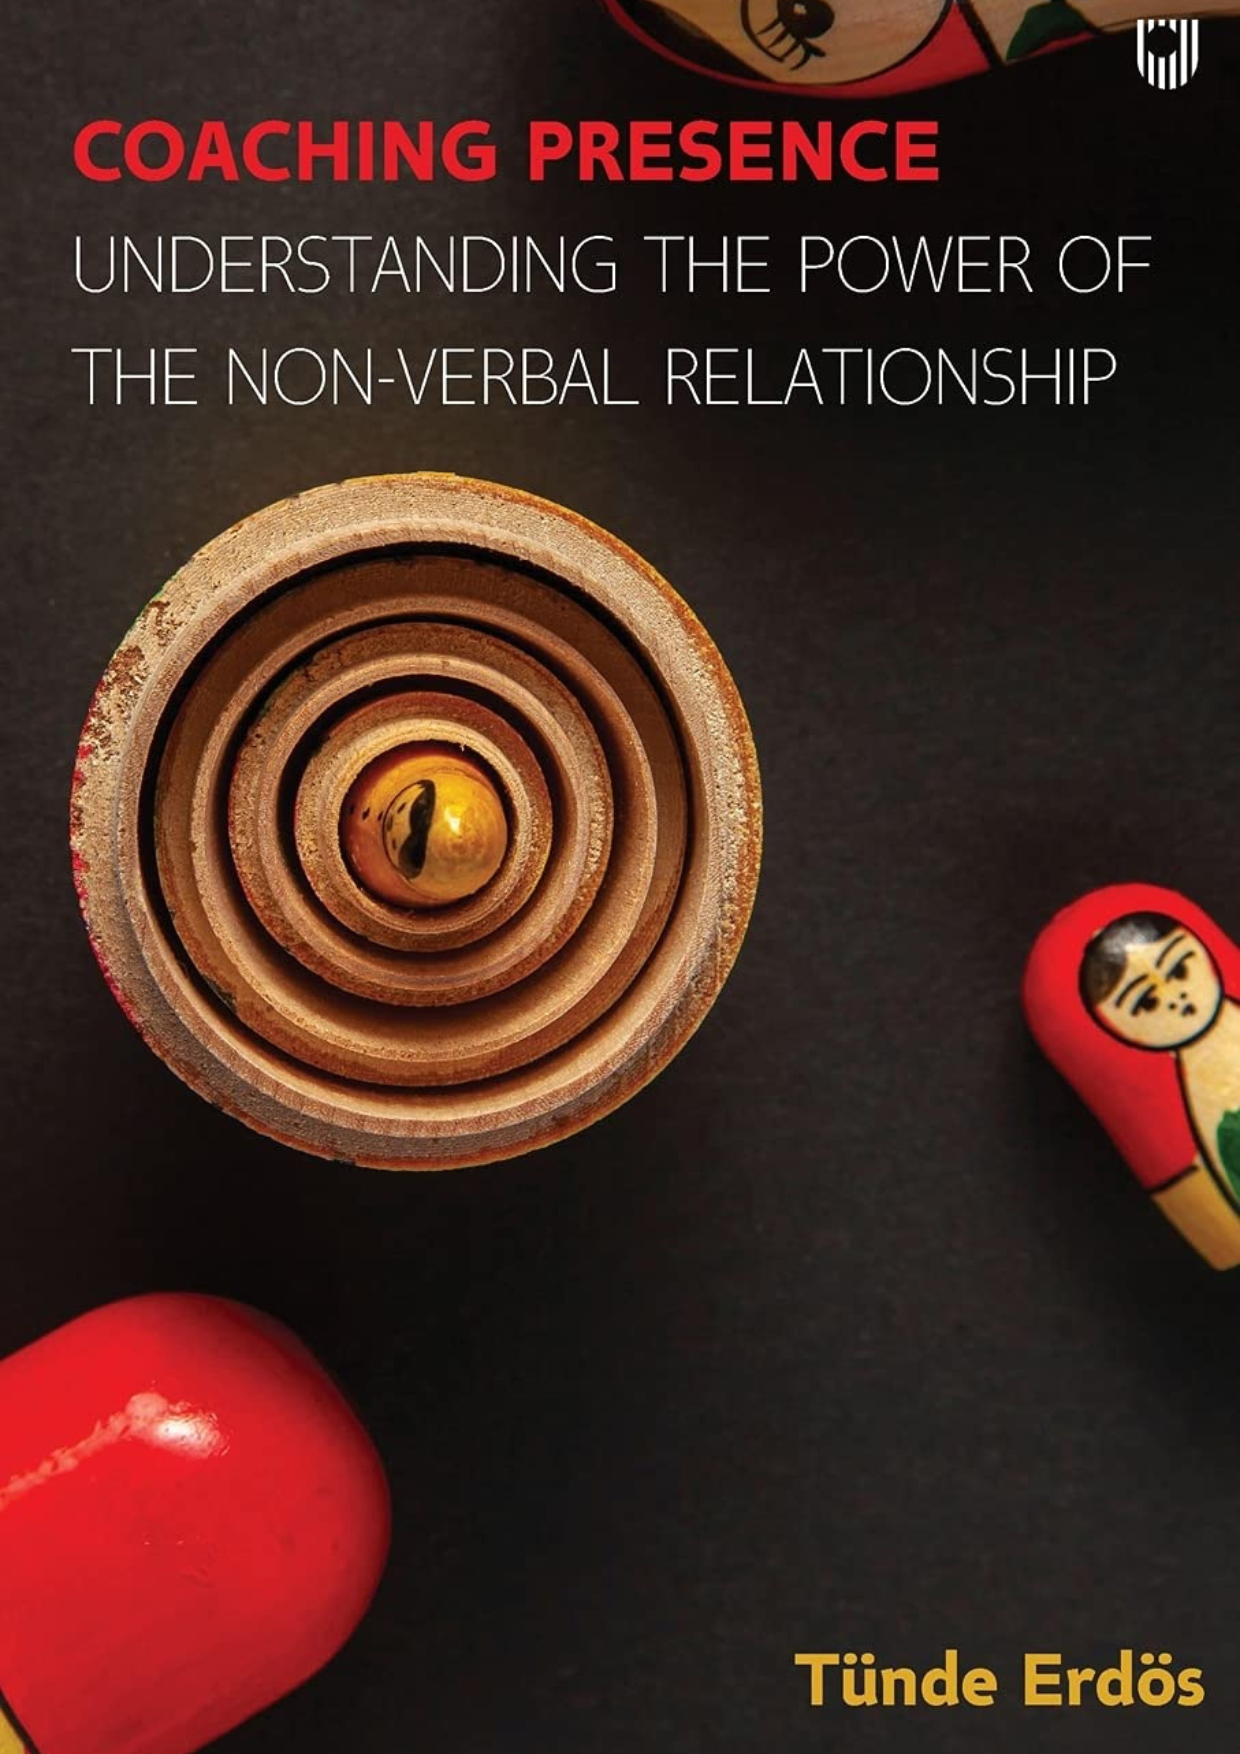 Presence – Understanding the power of the non-verbal relationship